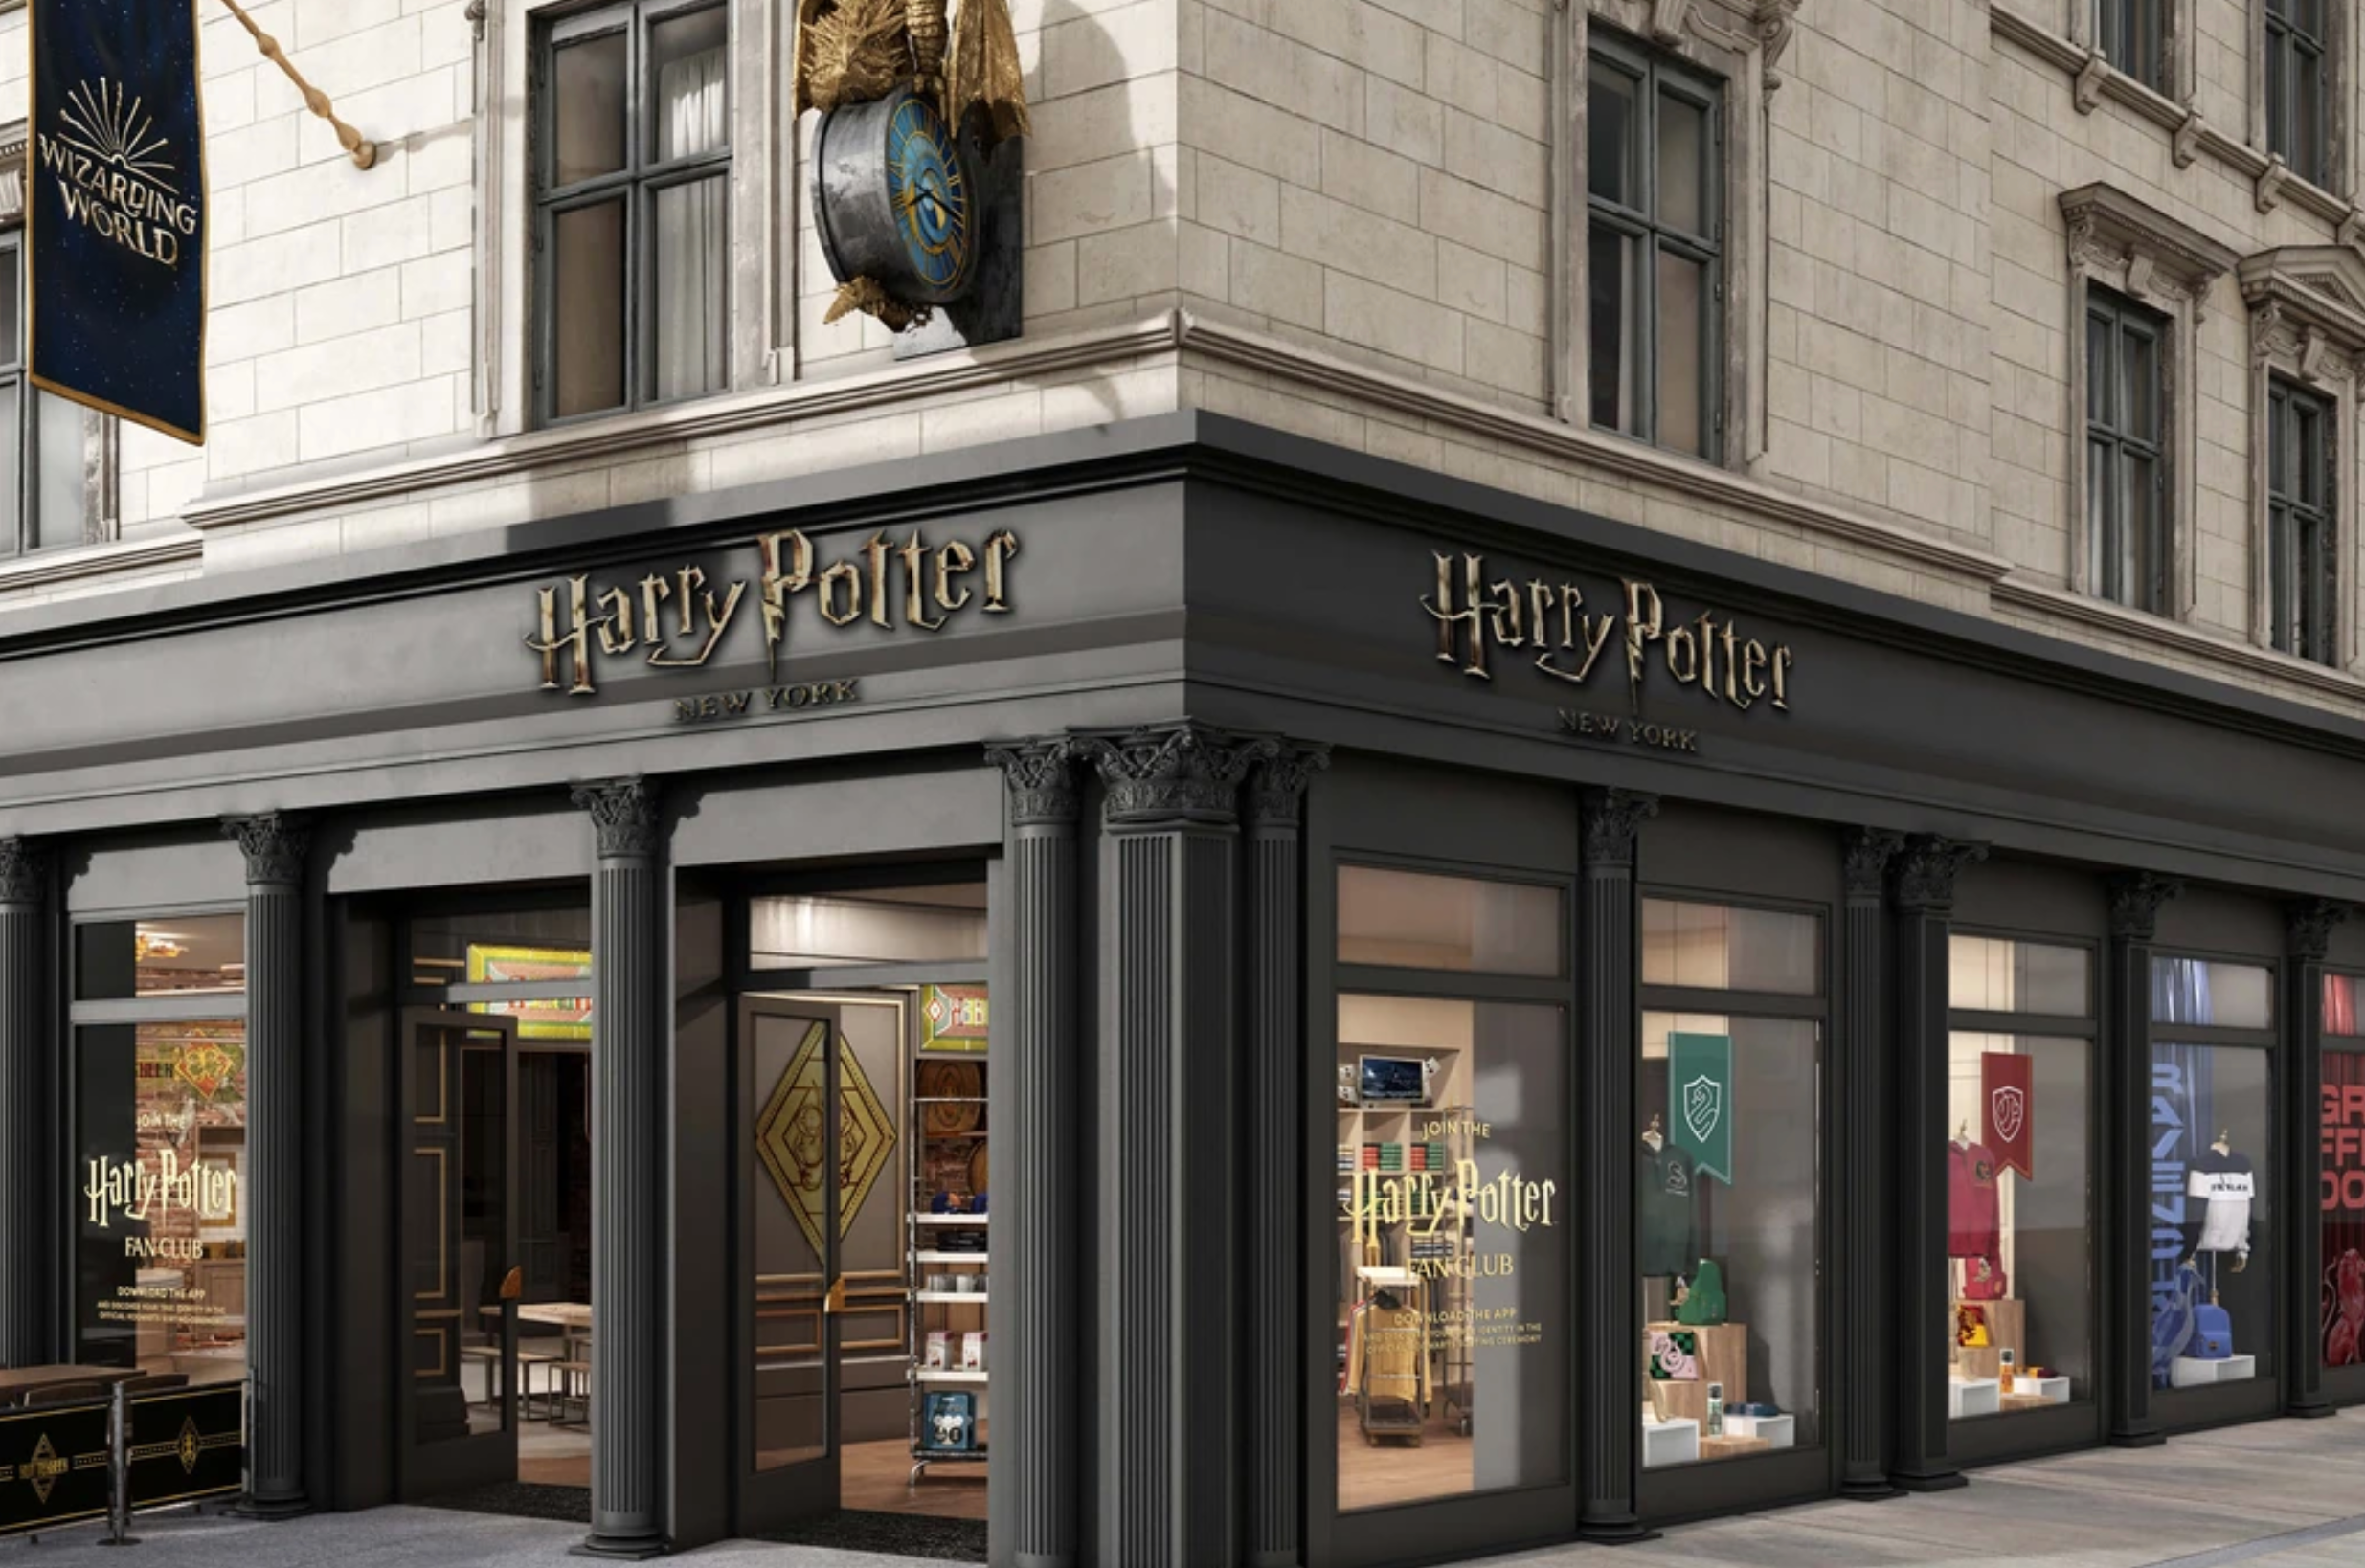 Suradam Næsten Slovenien World's largest 'Harry Potter' store to open in NYC this year - silive.com